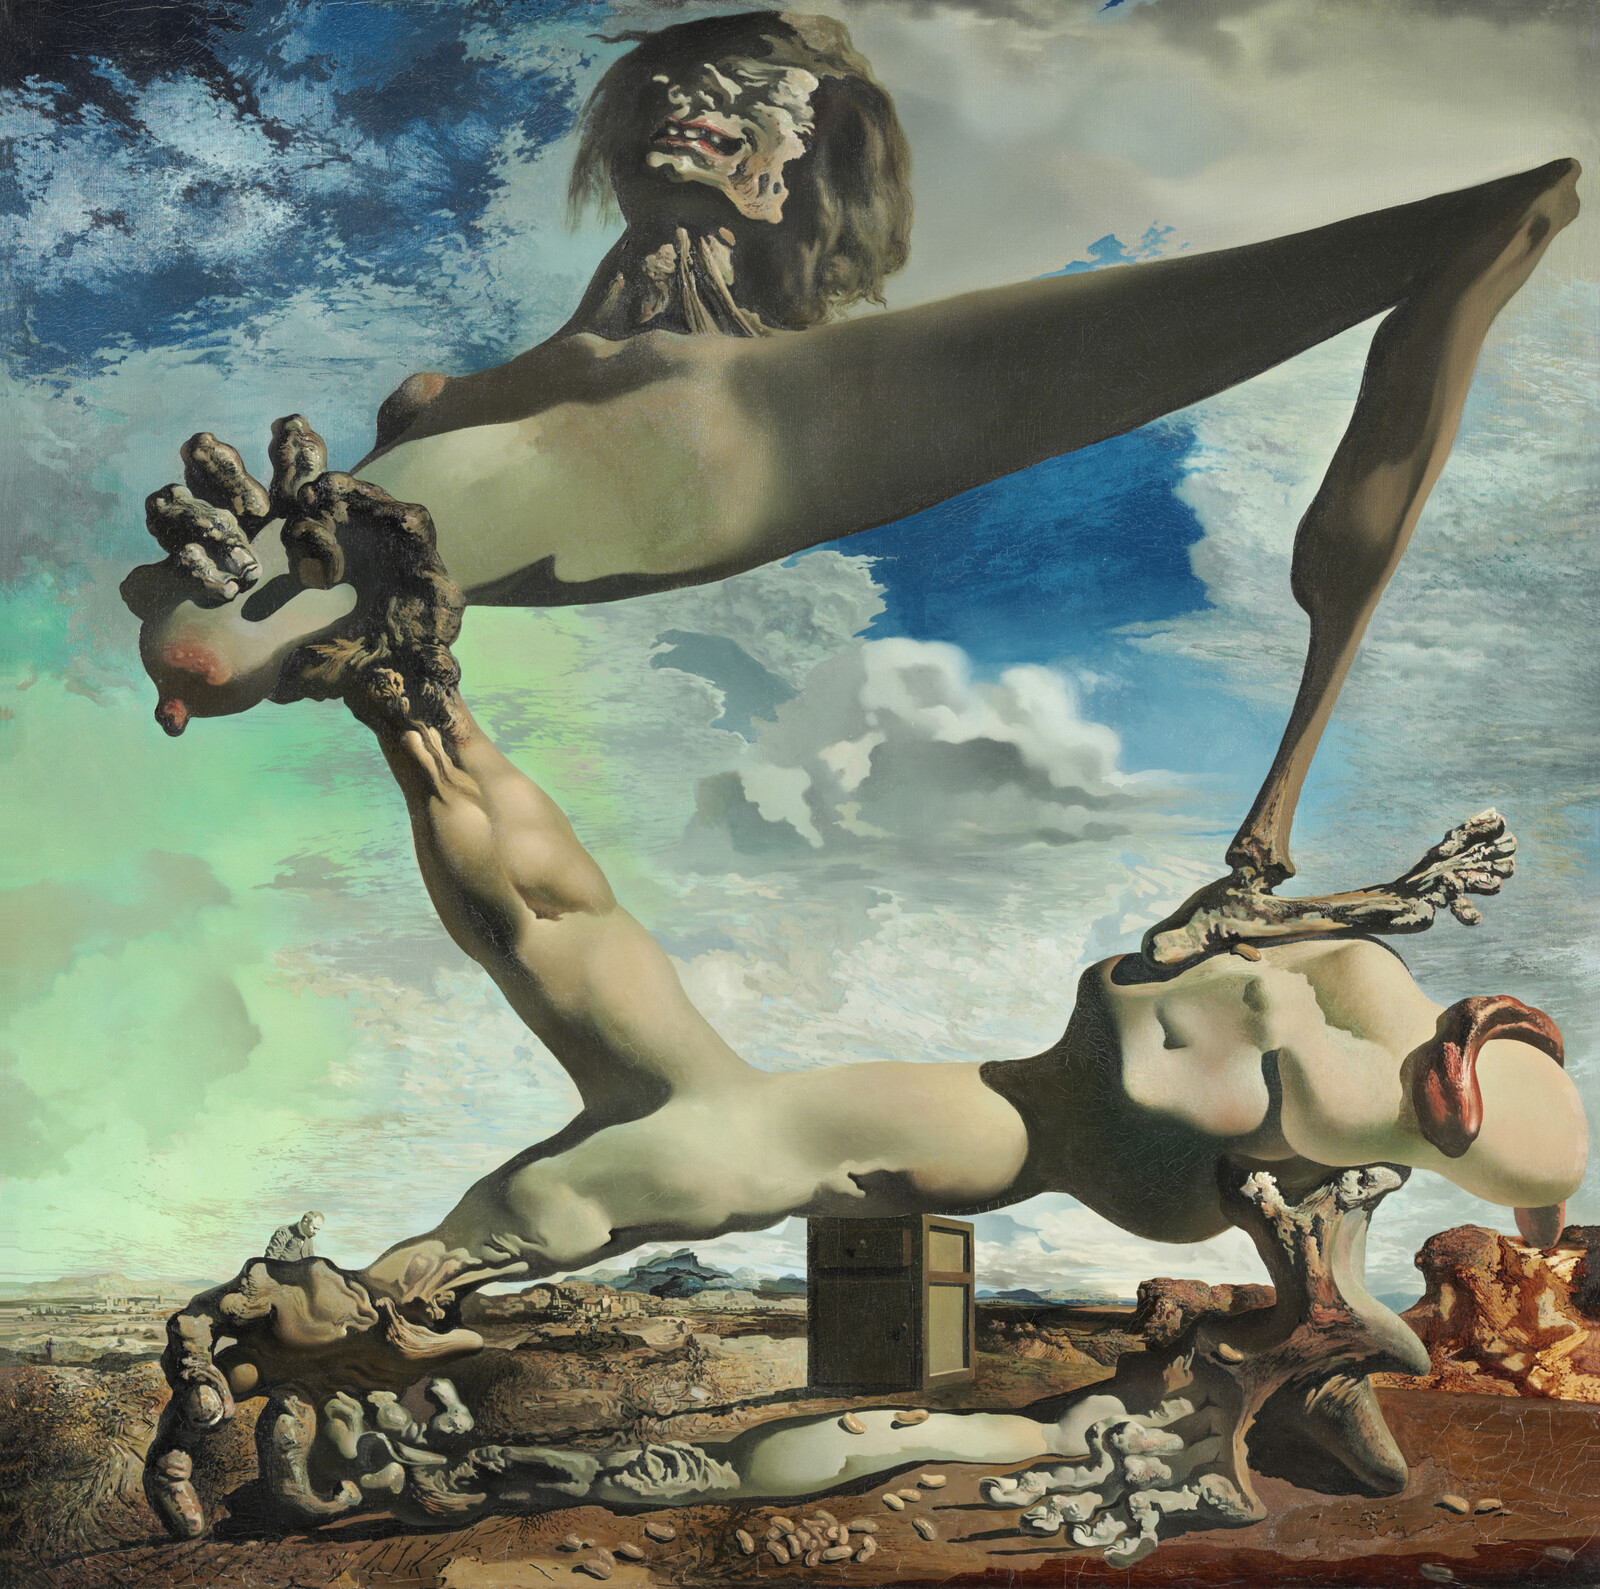 Surrealist painting by Salvador Dali depicting fleshy and bony figures in a monstrous fashion